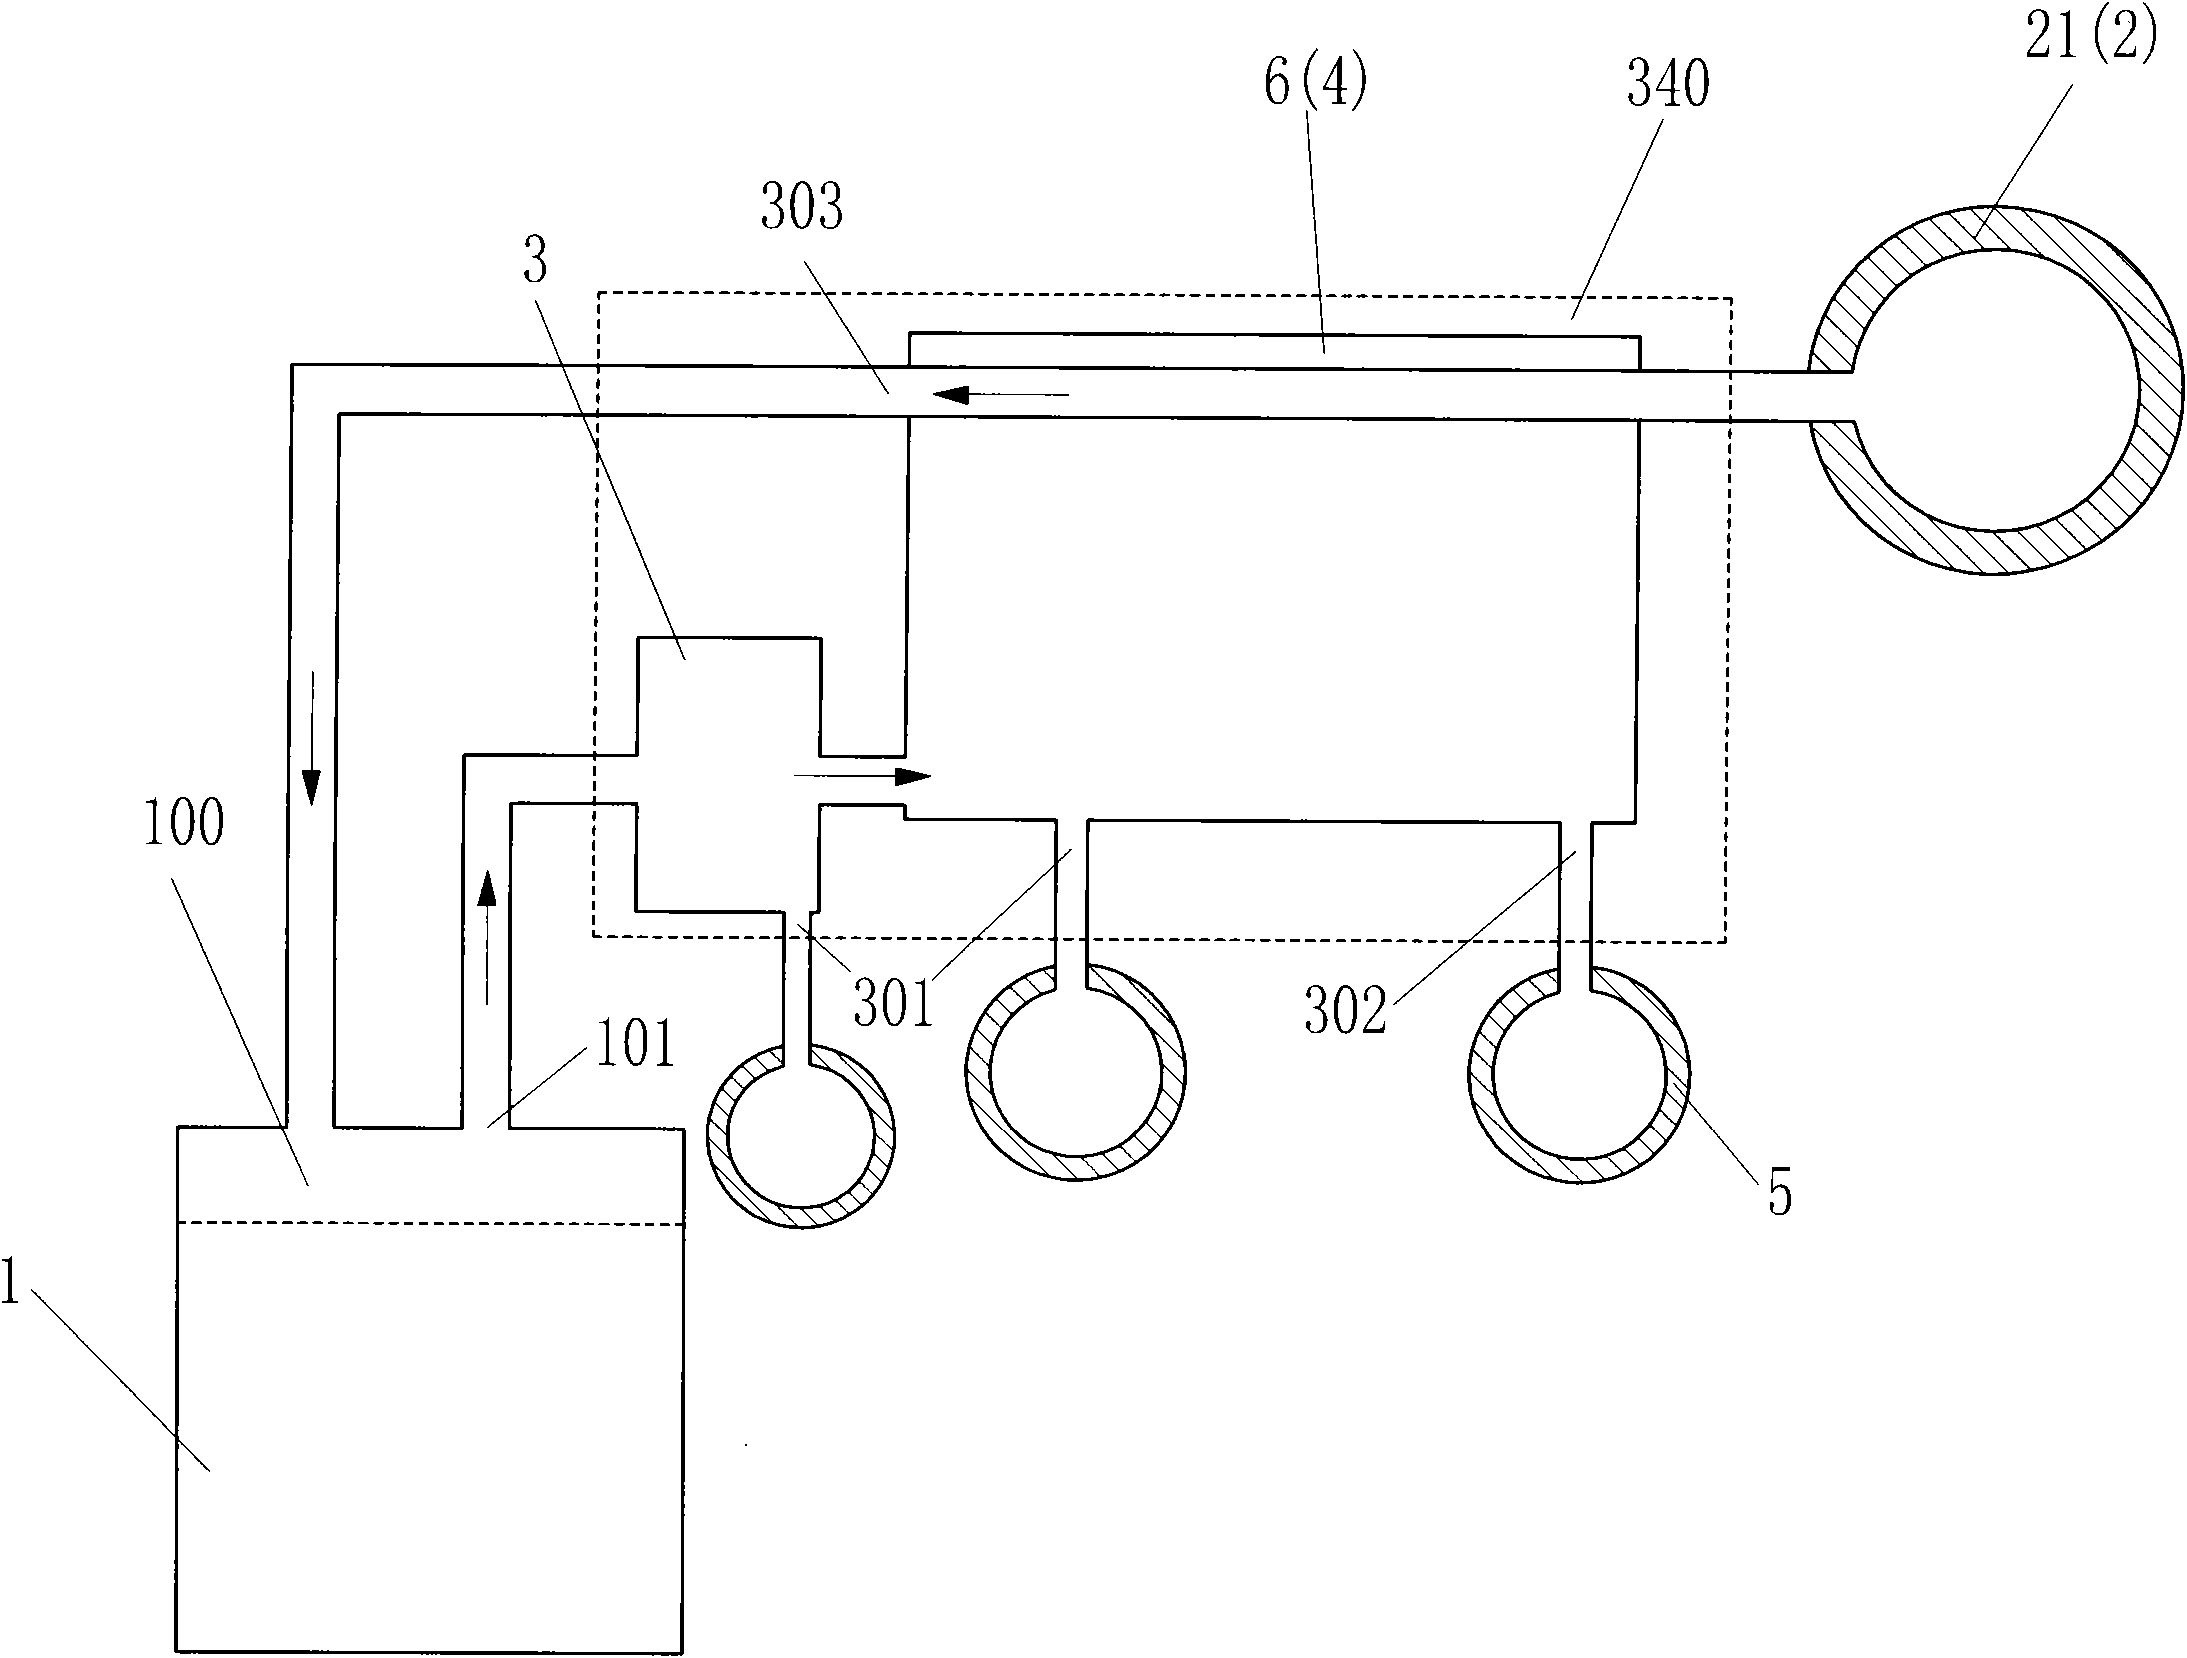 Closed gas cycle type thermal power system